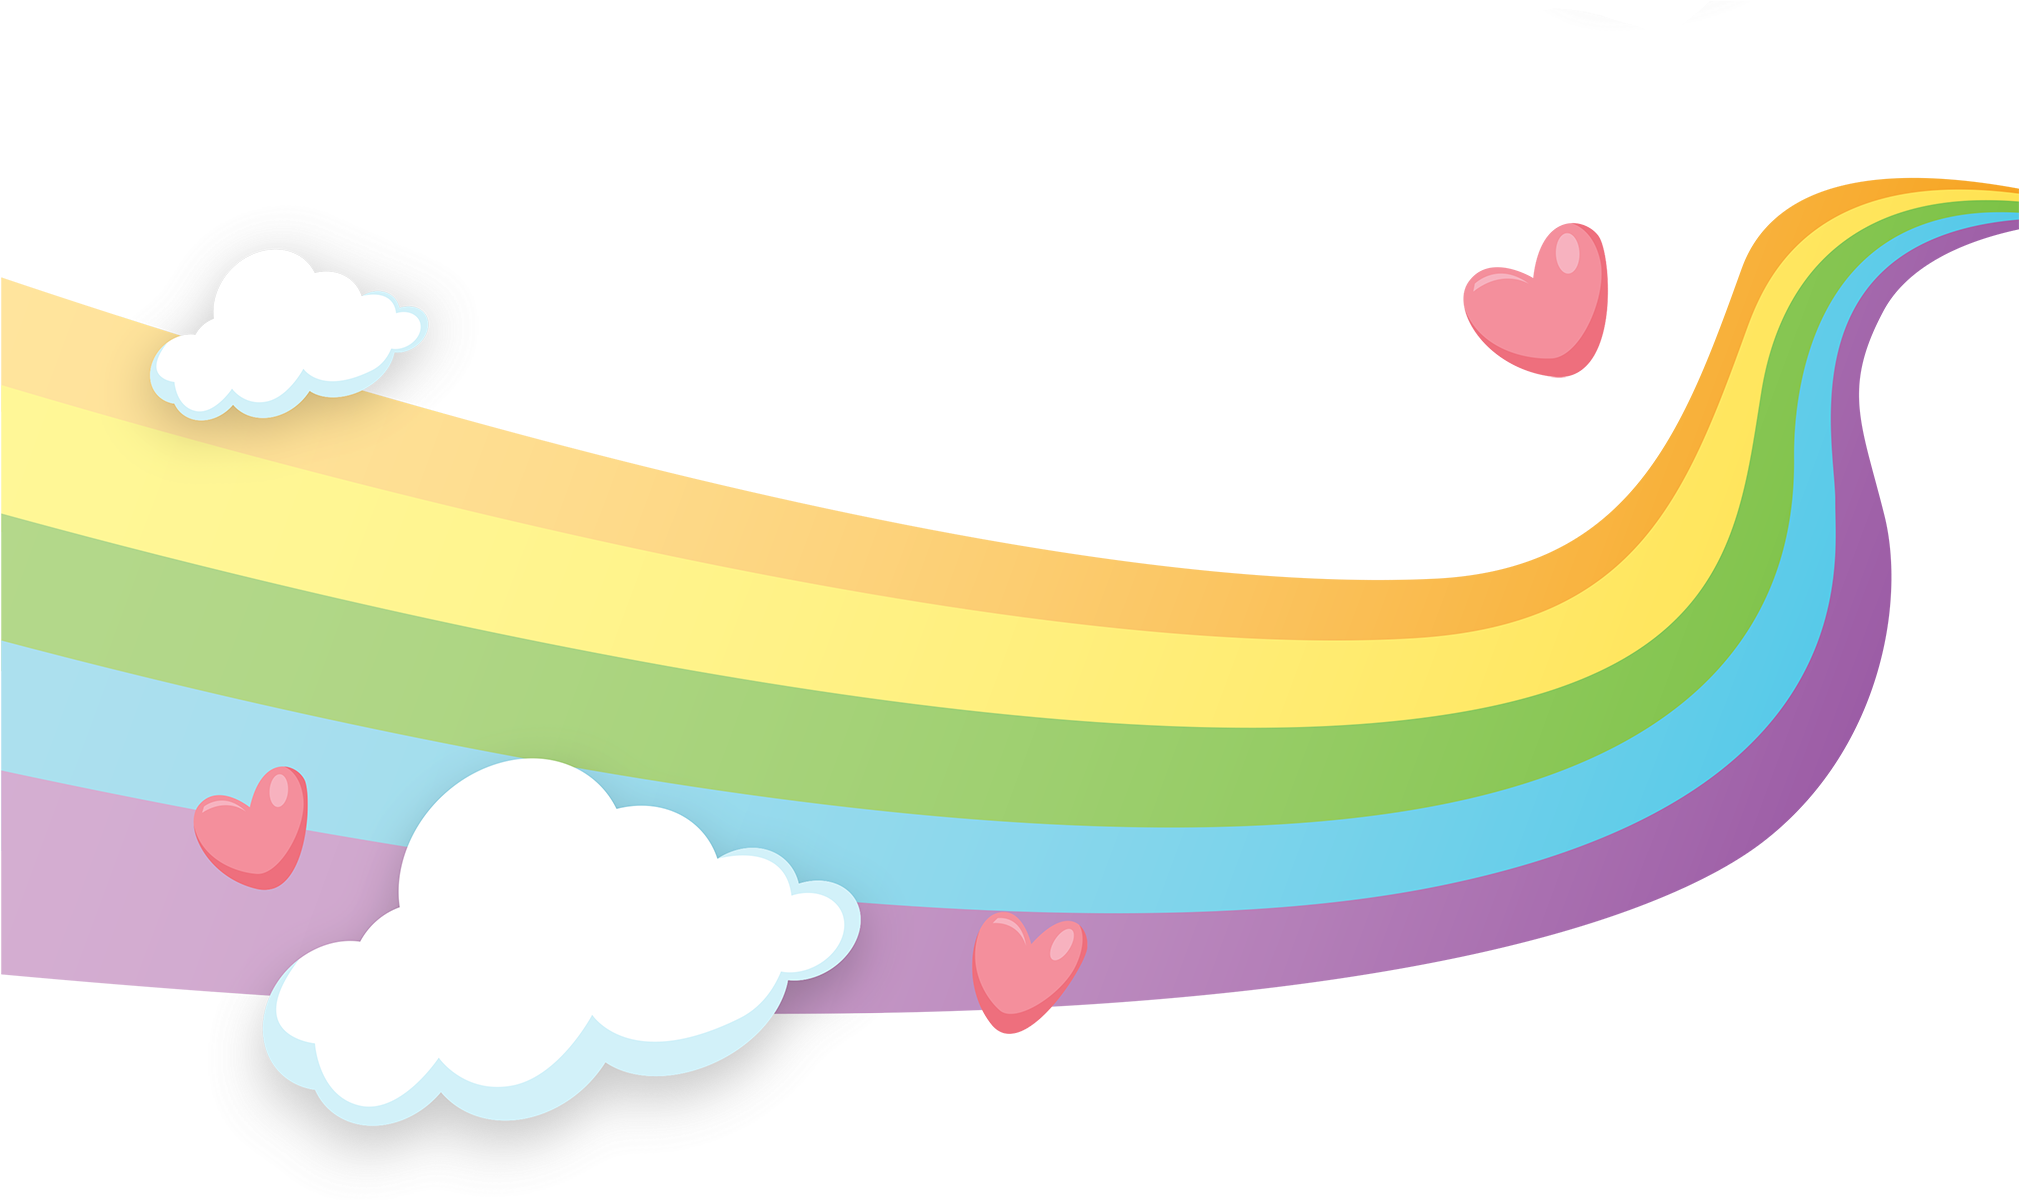 A Rainbow With Hearts And Clouds